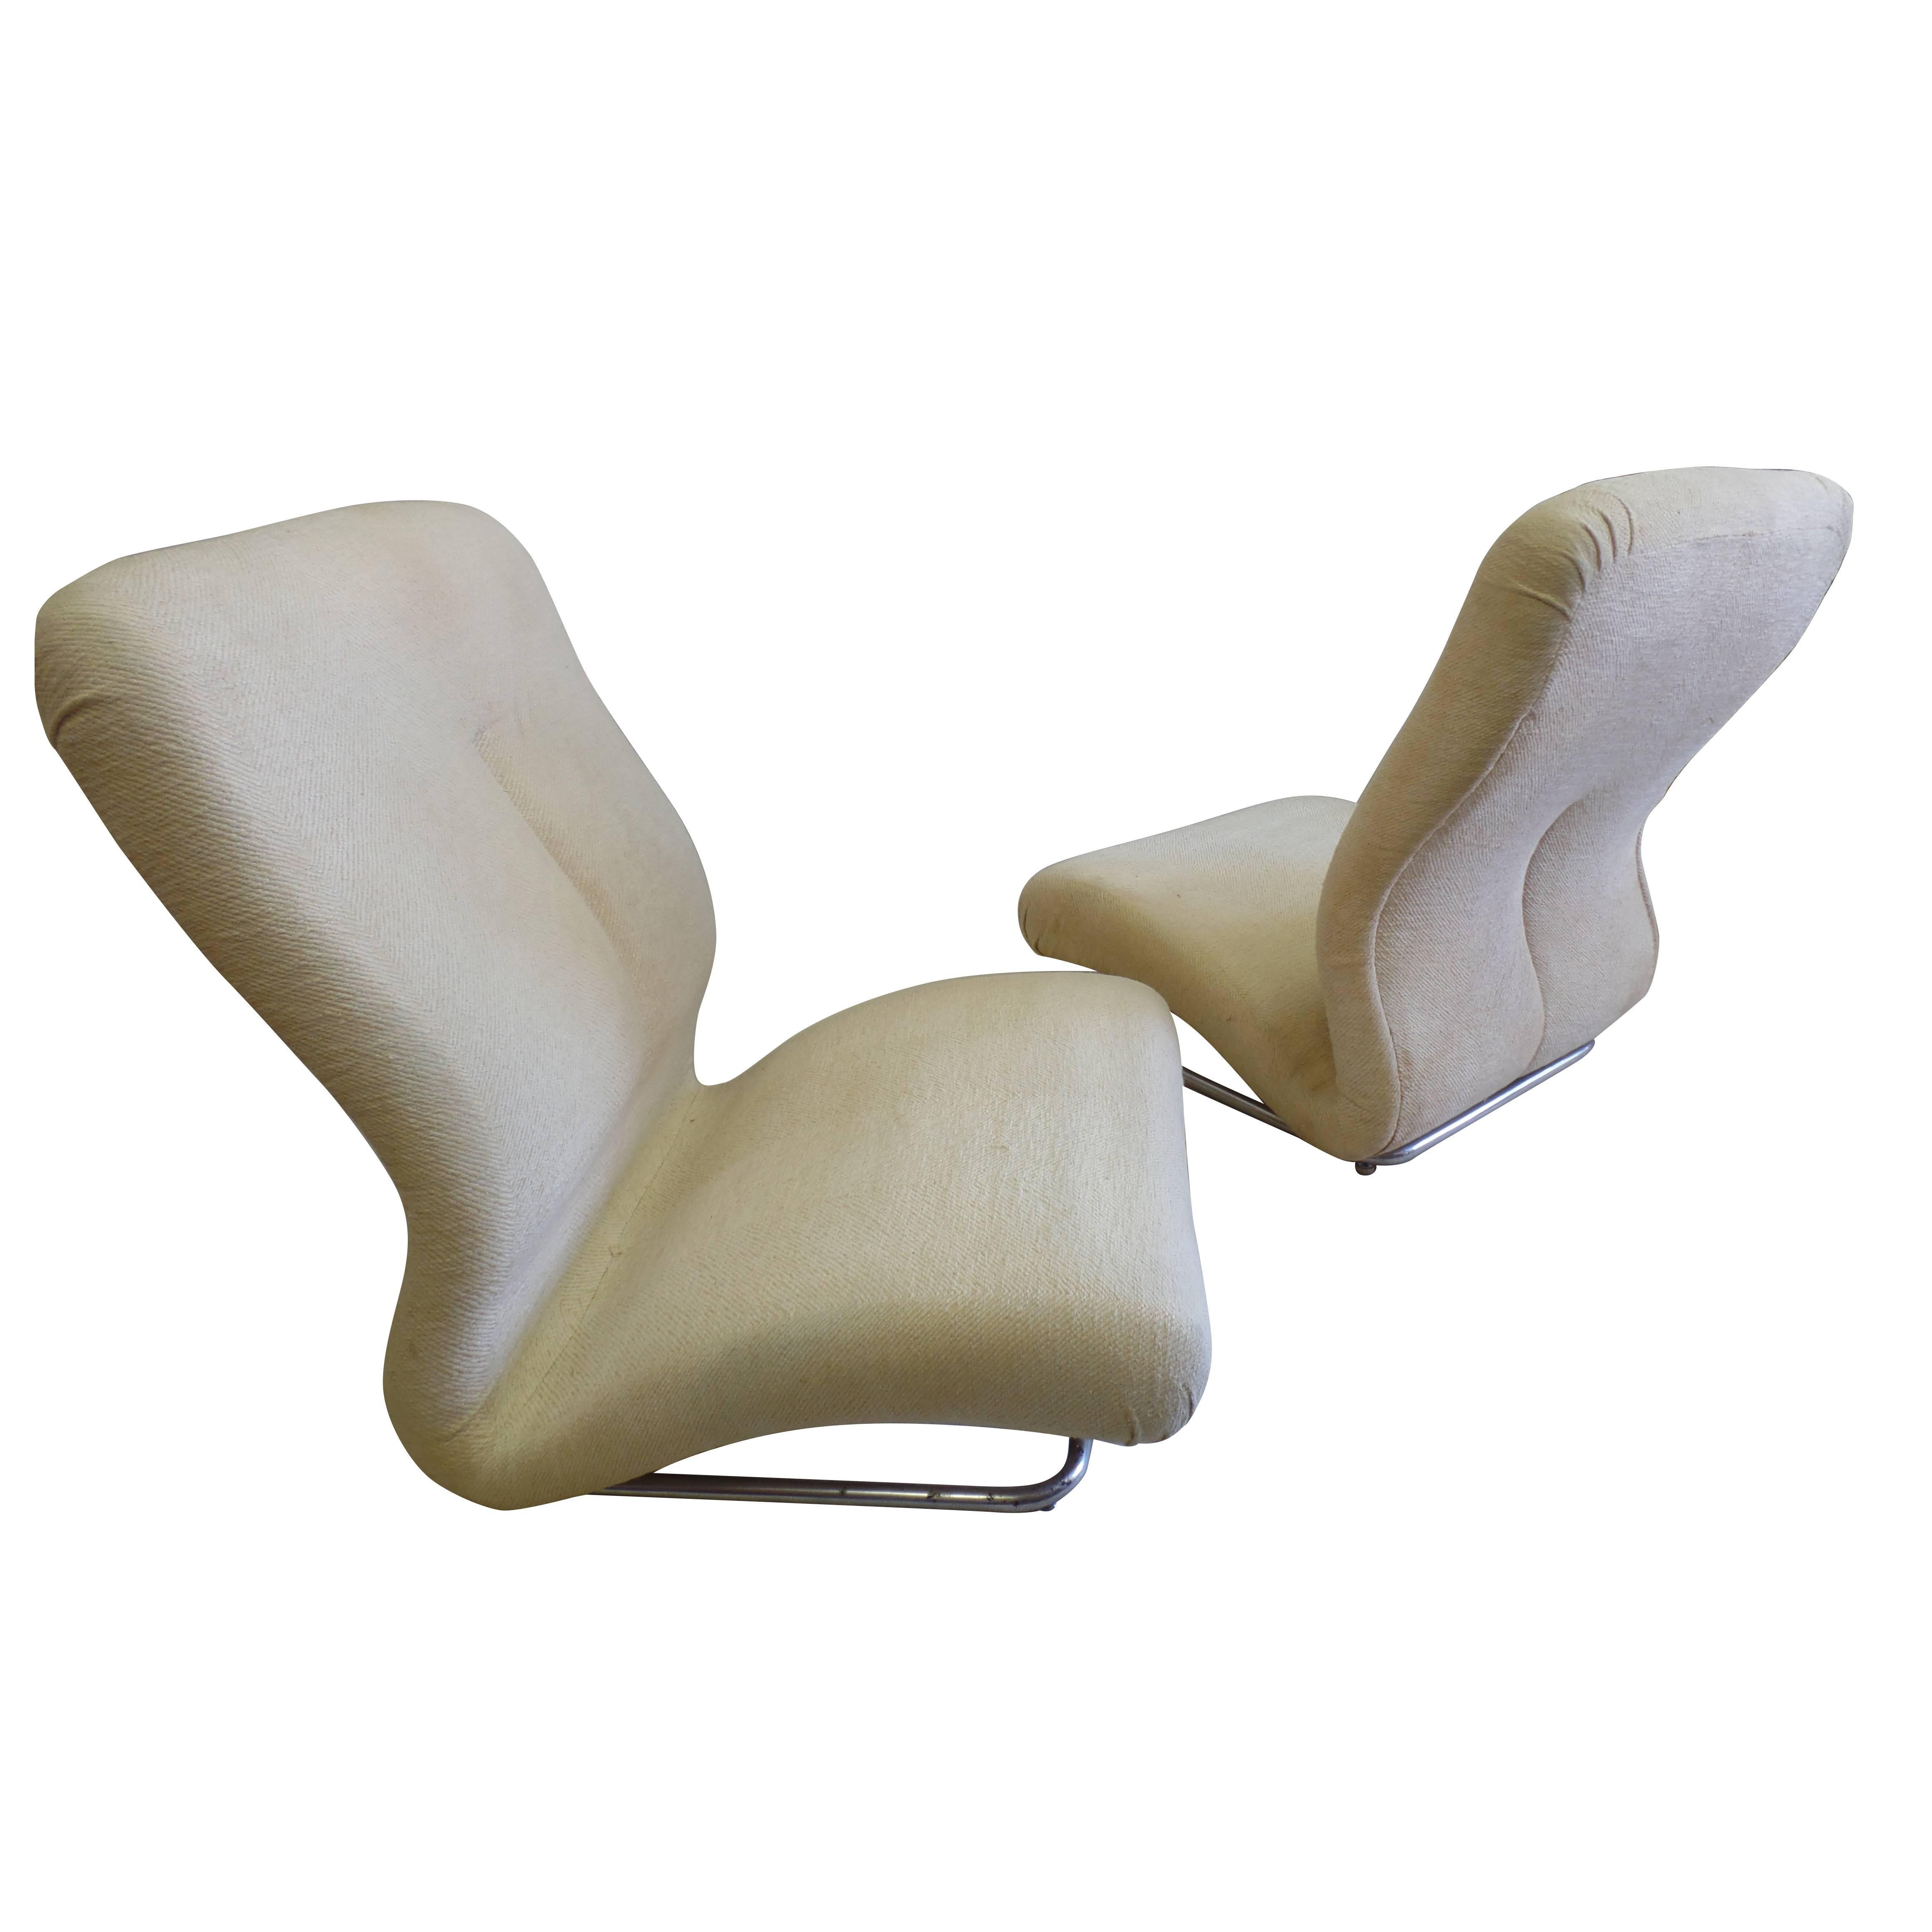 Rare Pair of Italian Mid-Century Modern / Space Age Lounge Chairs by IPE For Sale